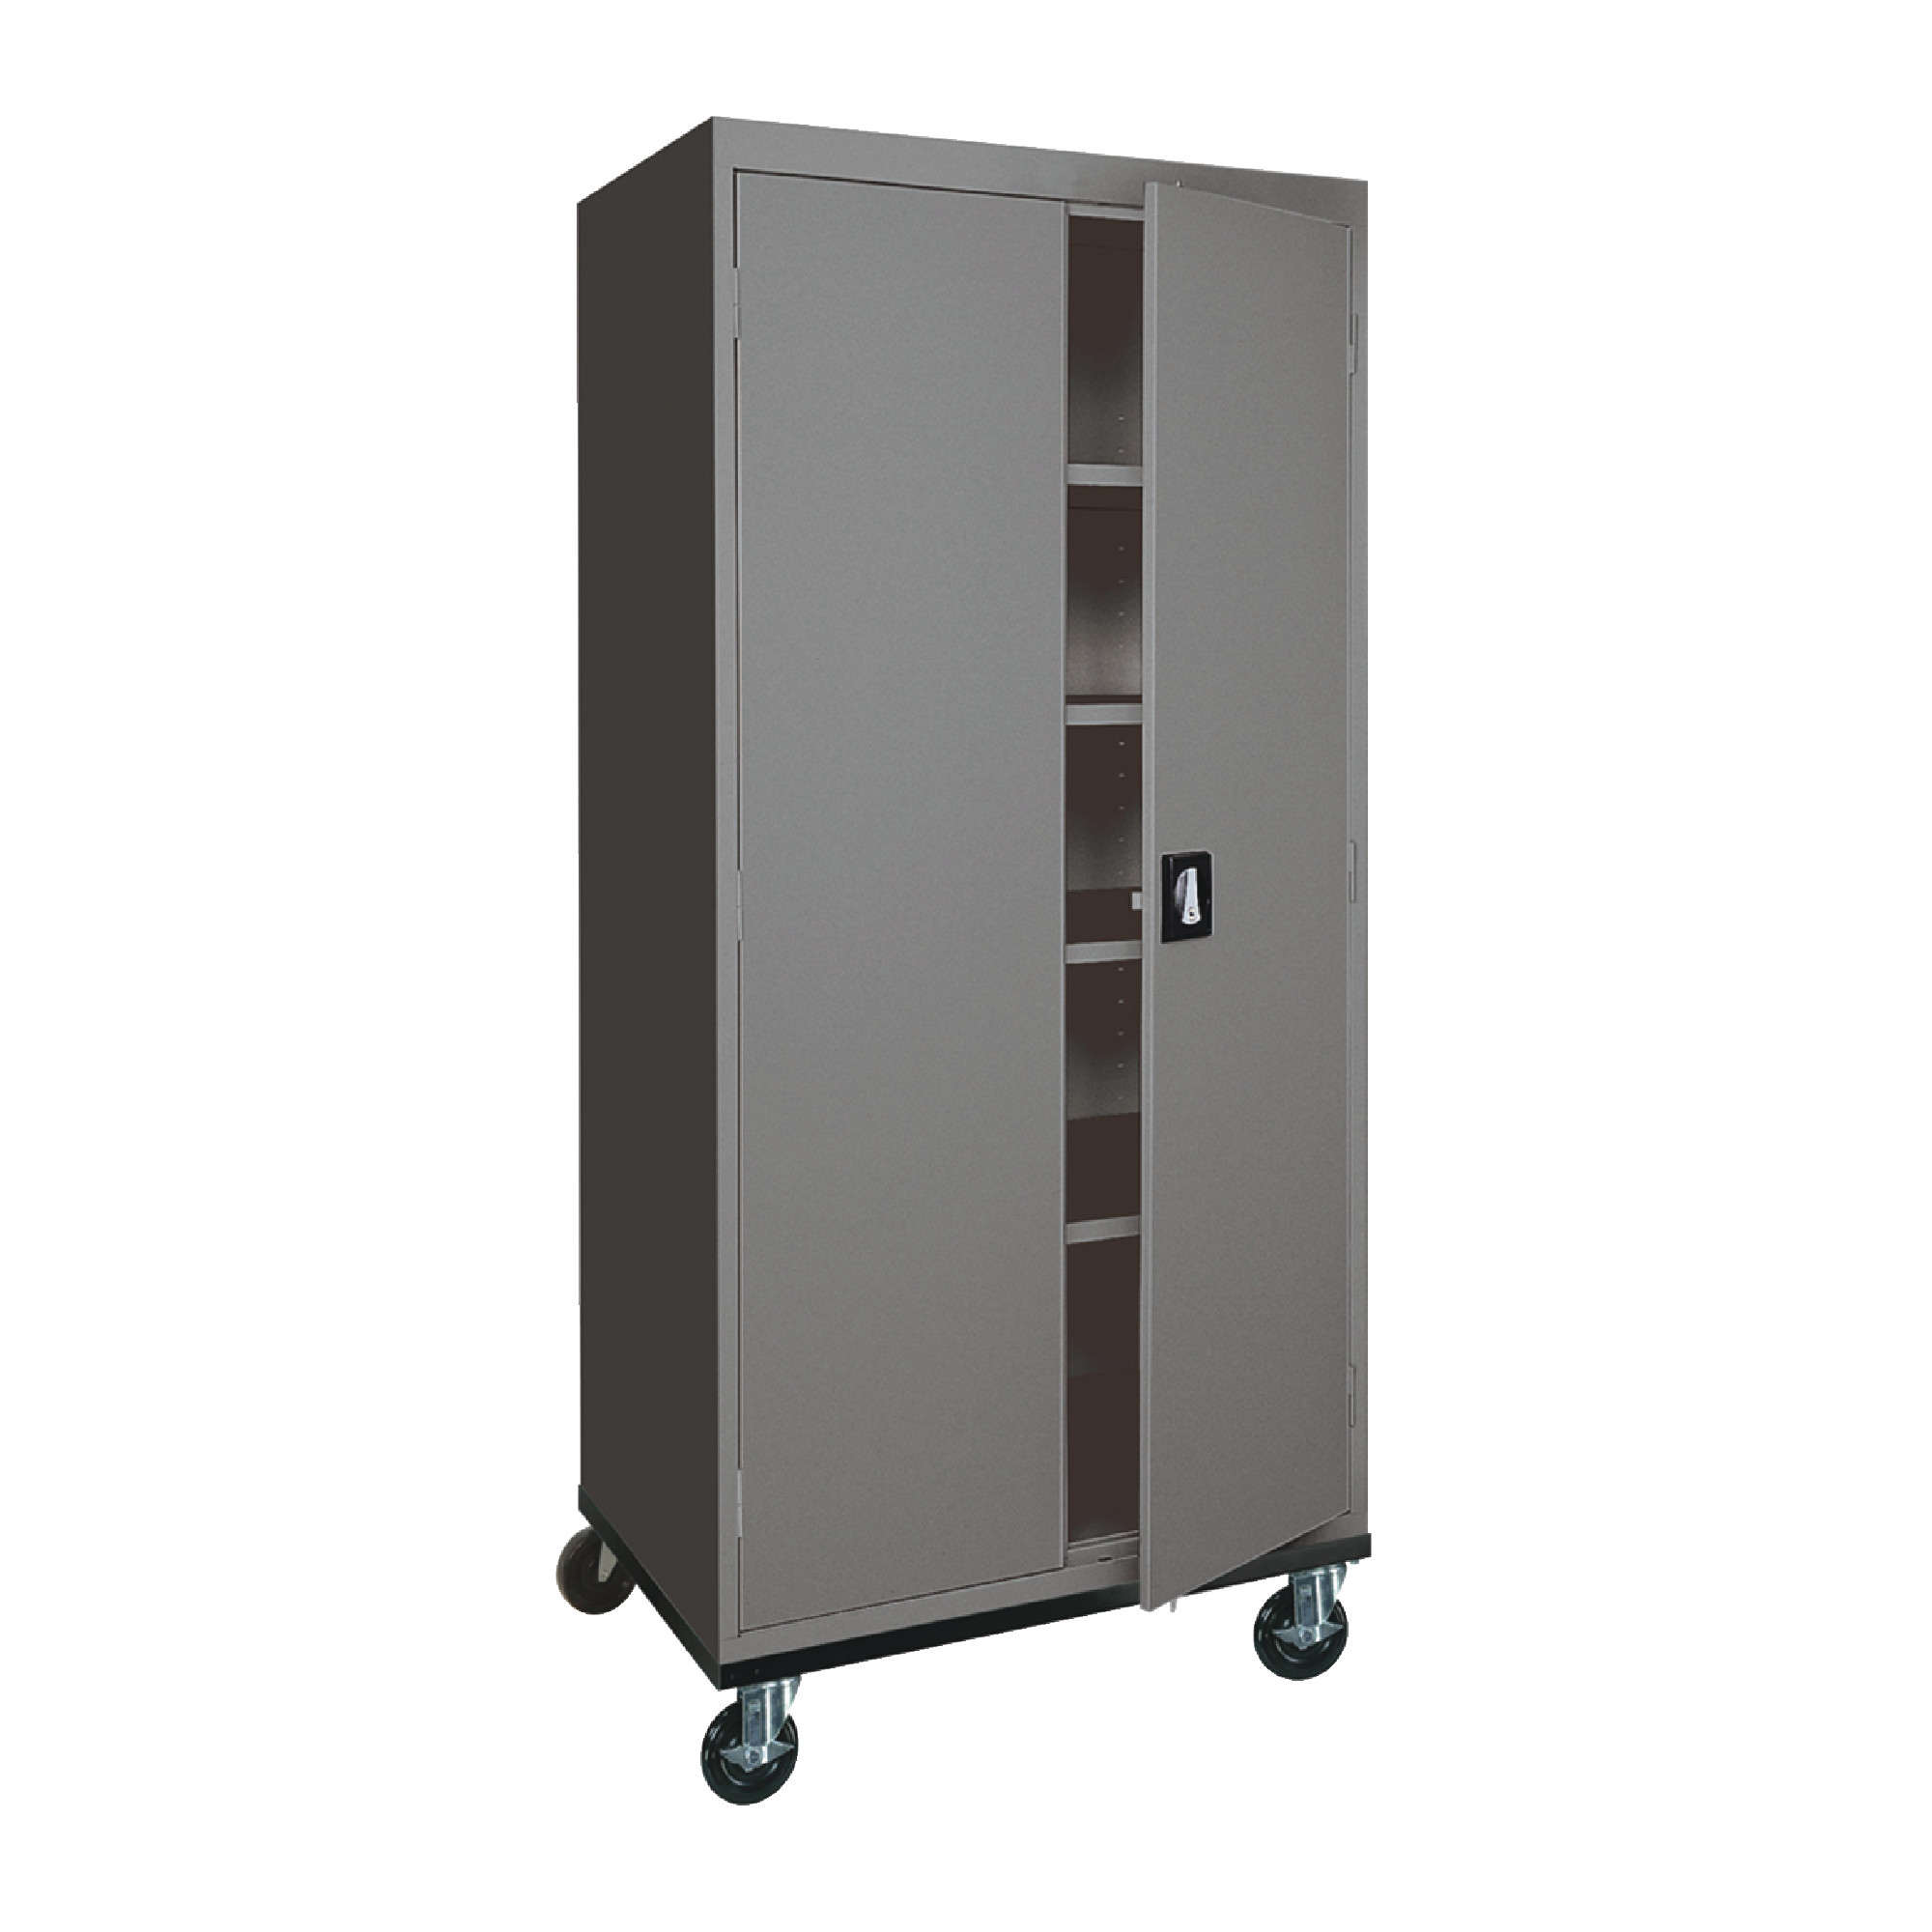 Heavy Duty Mobile Storage Cabinets